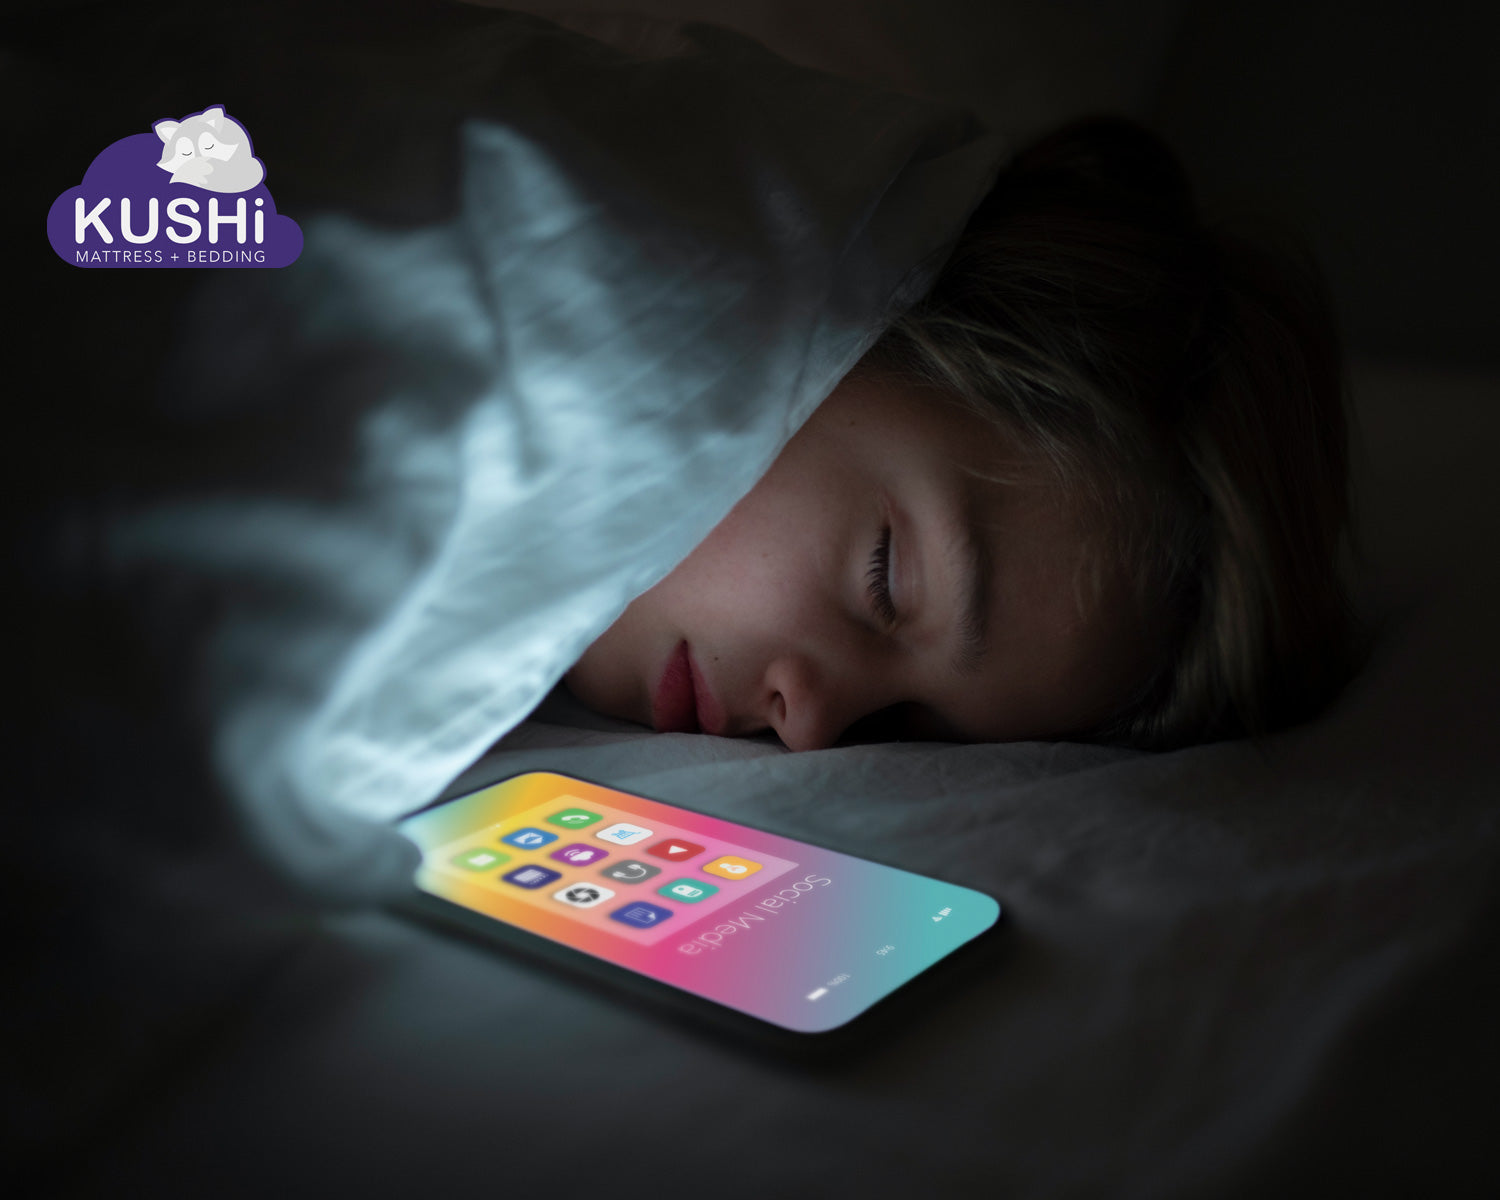 Sleeptexting – What is it? It’s causes & consequences.